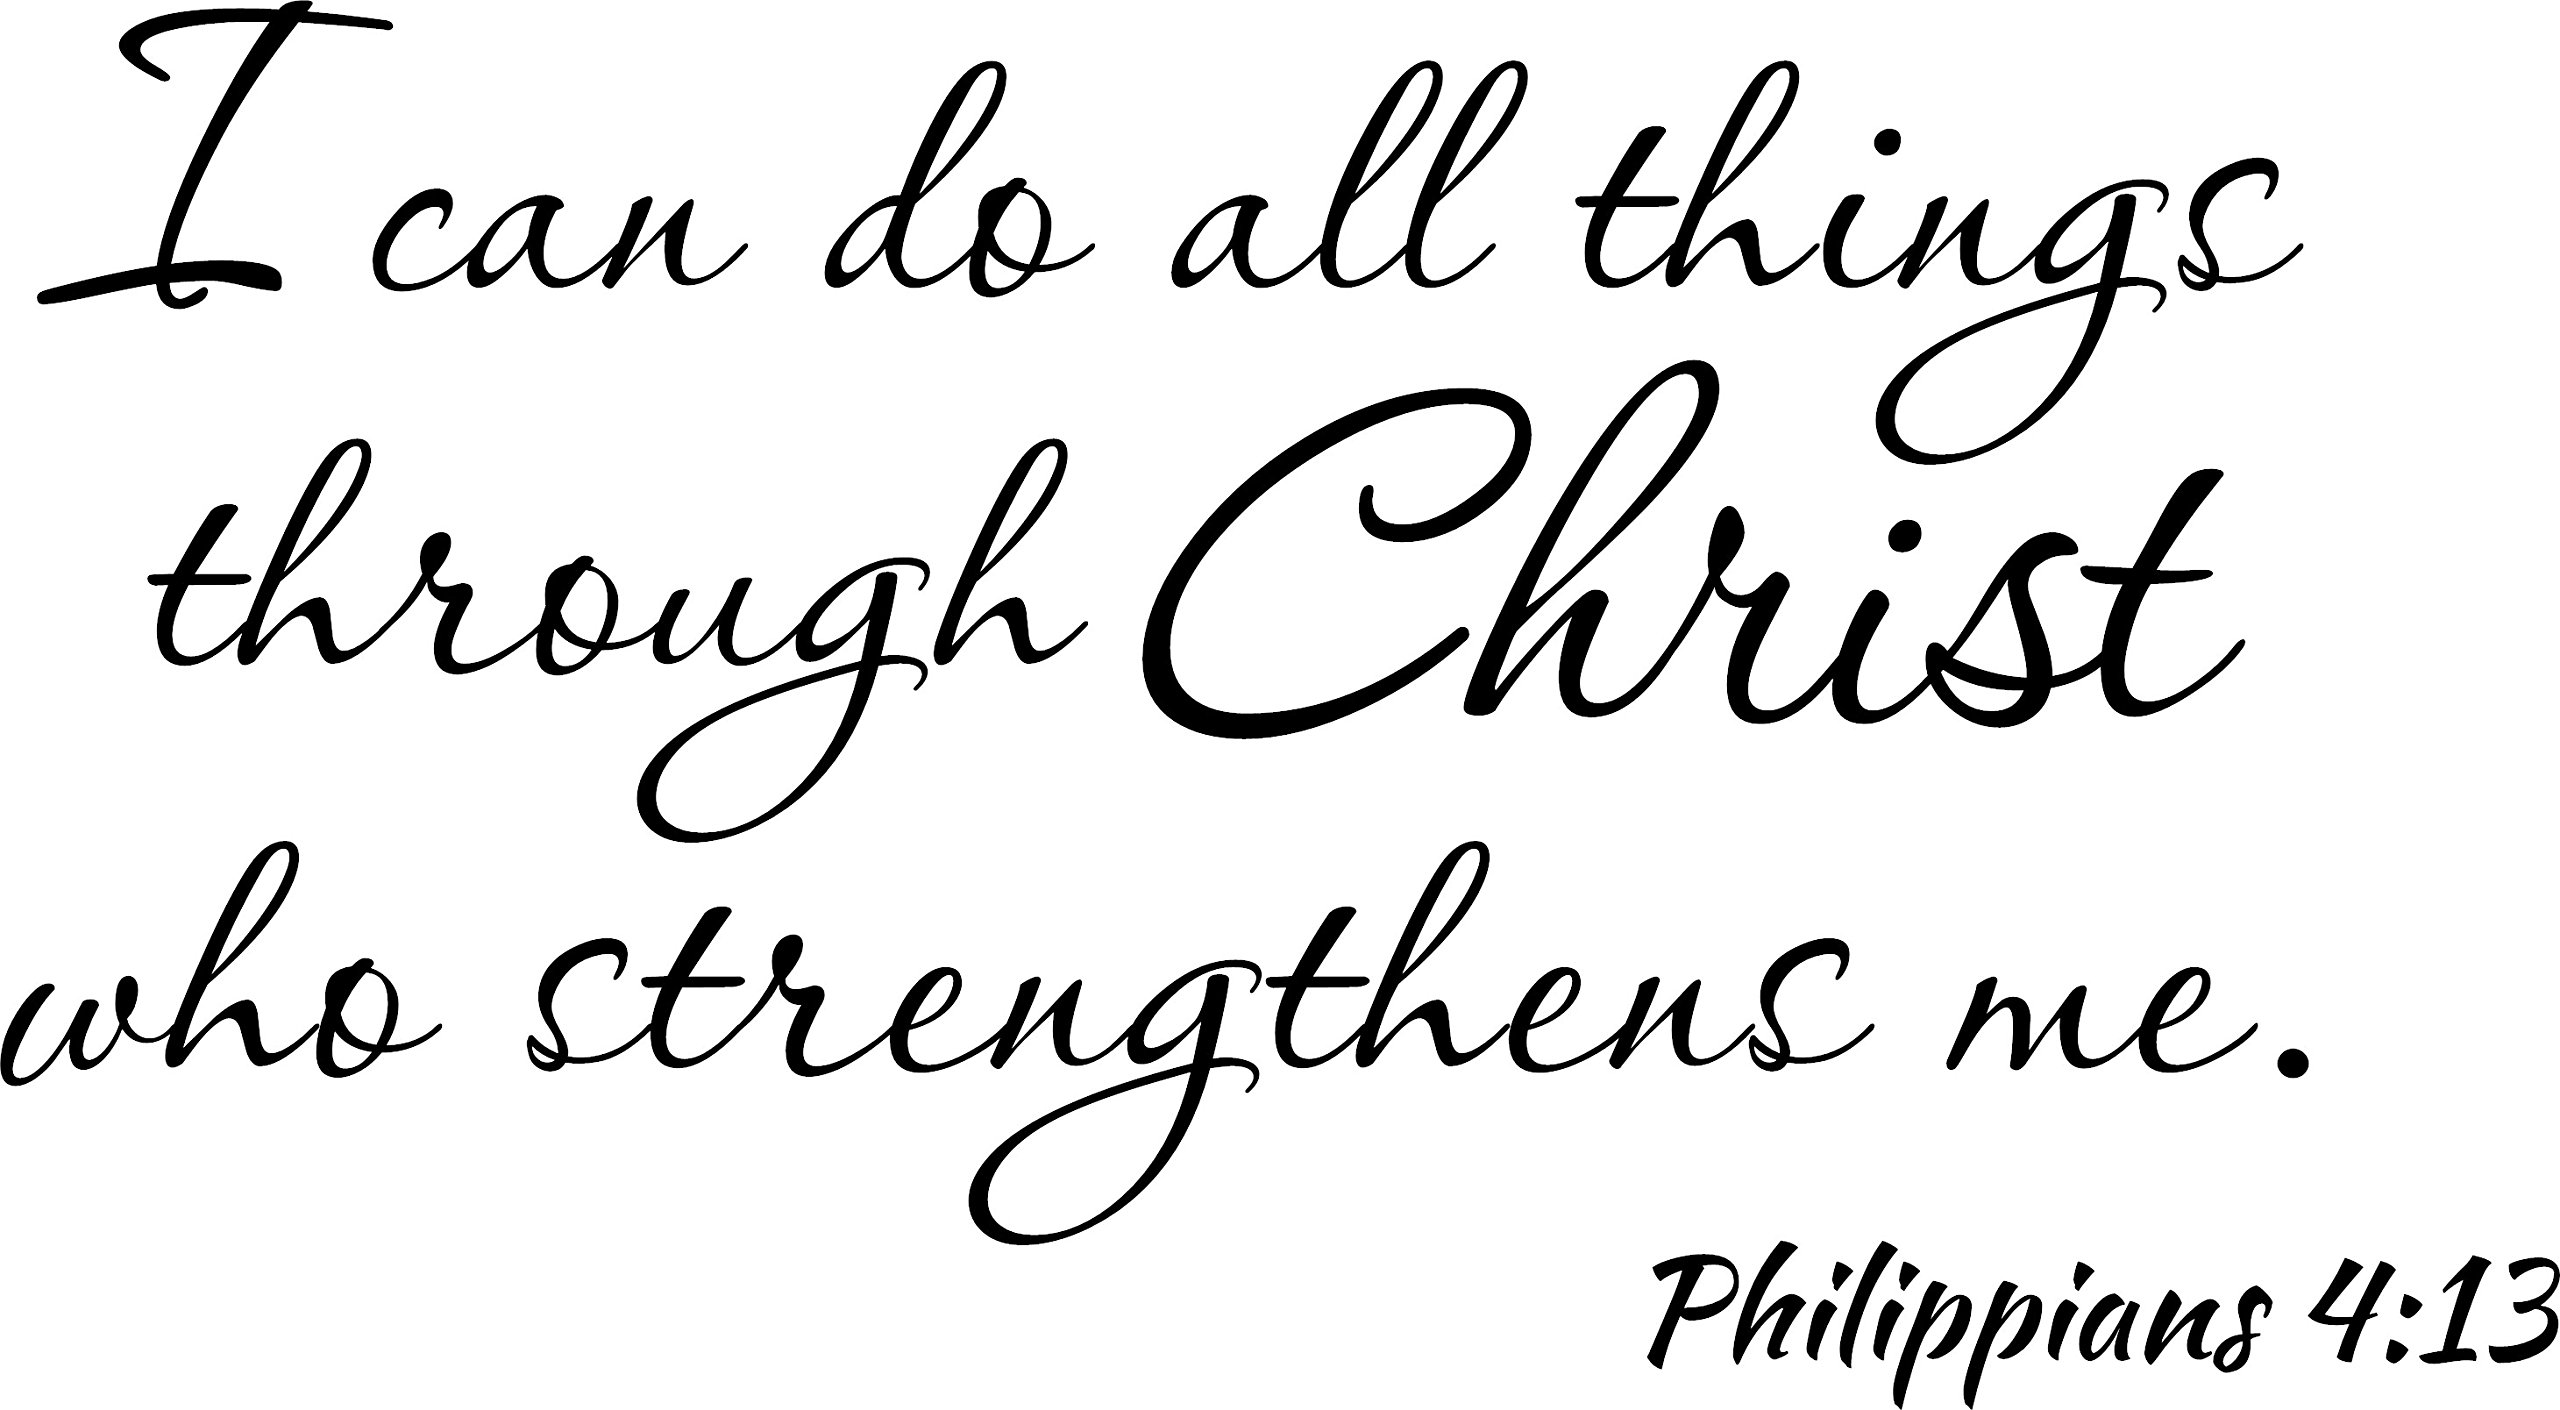 Wall Decal I Can Do All Things Through Christ Who Strengthens Me Philippians 4:13 Bible Verse Quote, Tools & Home Improvement